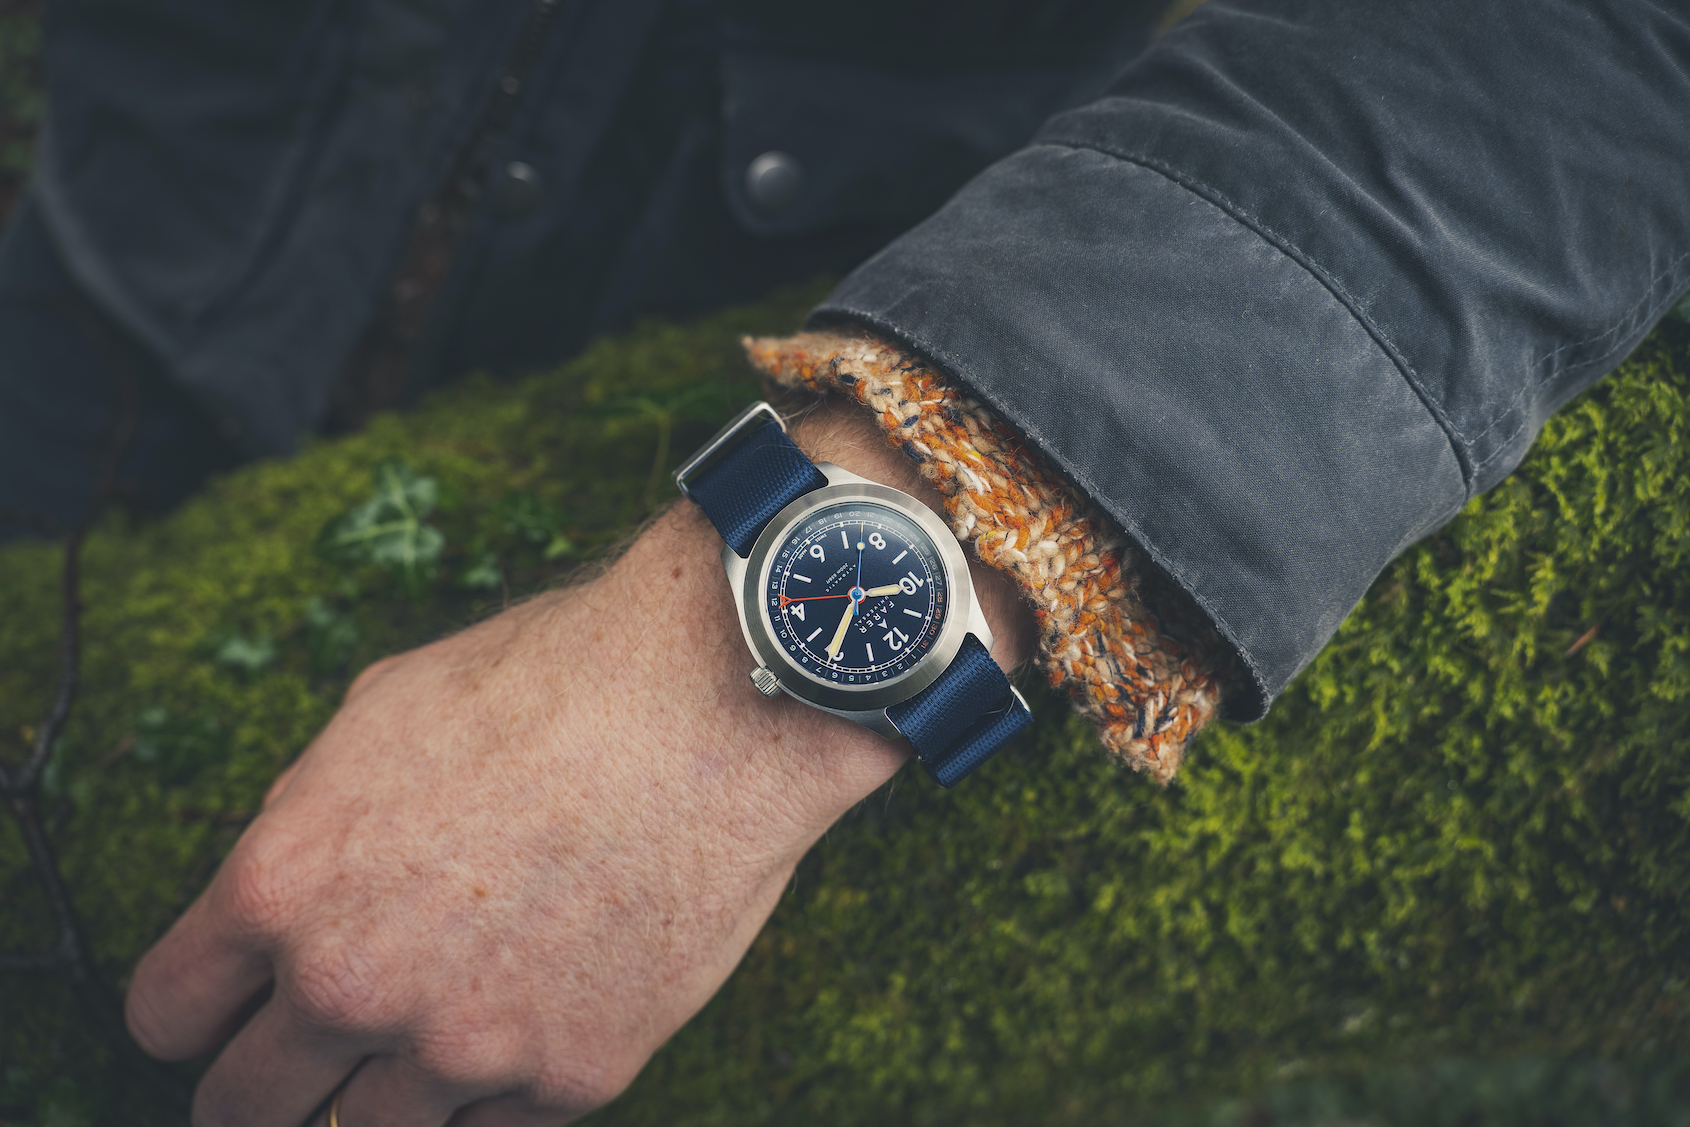 Farer Field Watch Collection